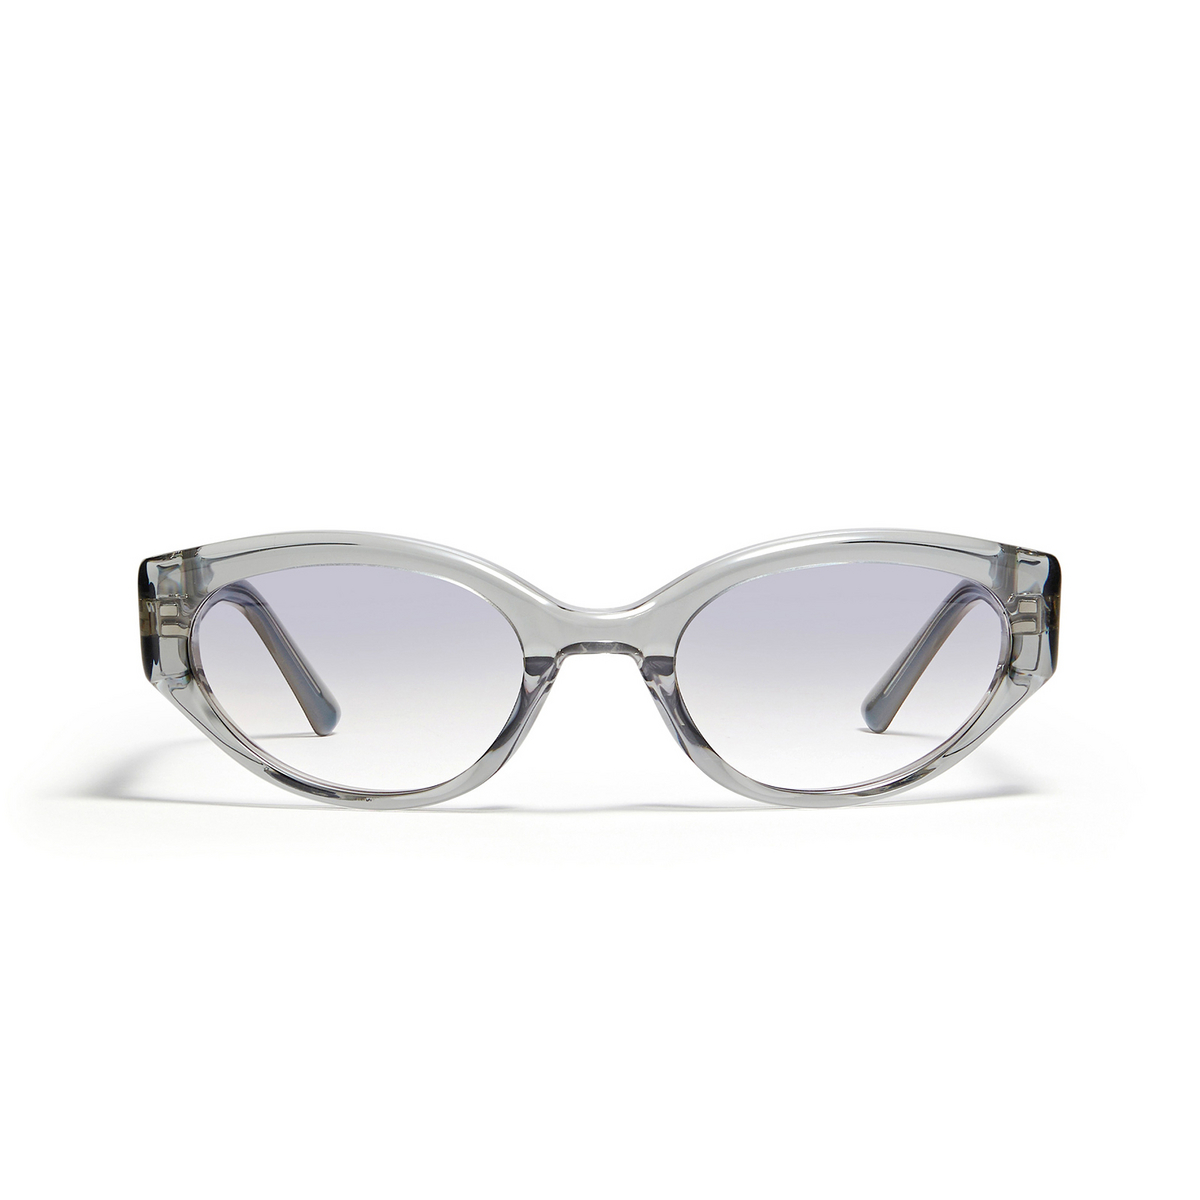 Gentle Monster® Cat-eye Sunglasses: Molto color Grey GC5 - front view.